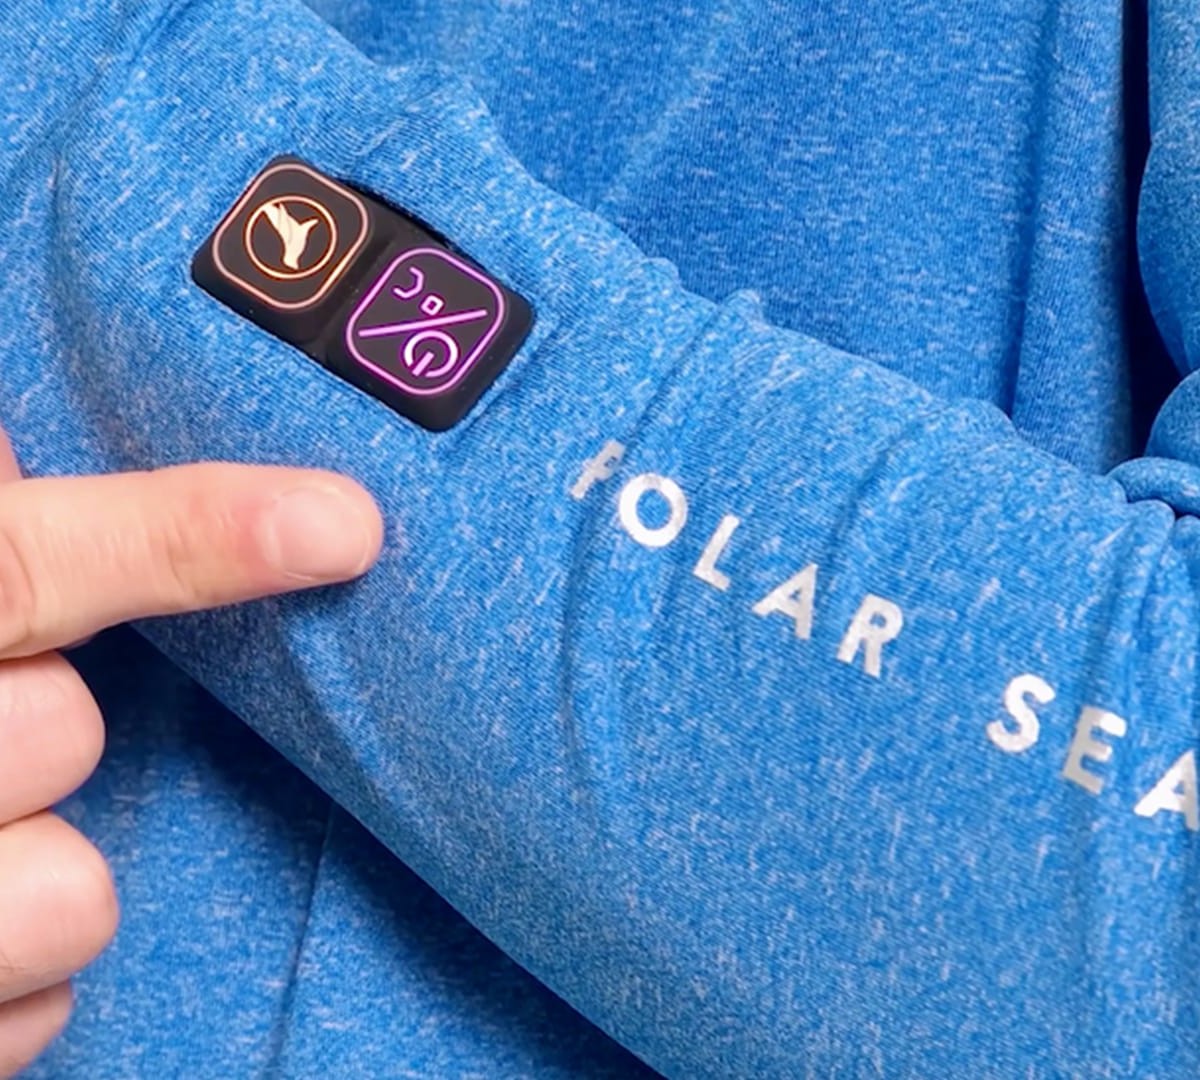 Polar Seal Heated Zip Top self-warming shirt creates instant heat at the touch of a button